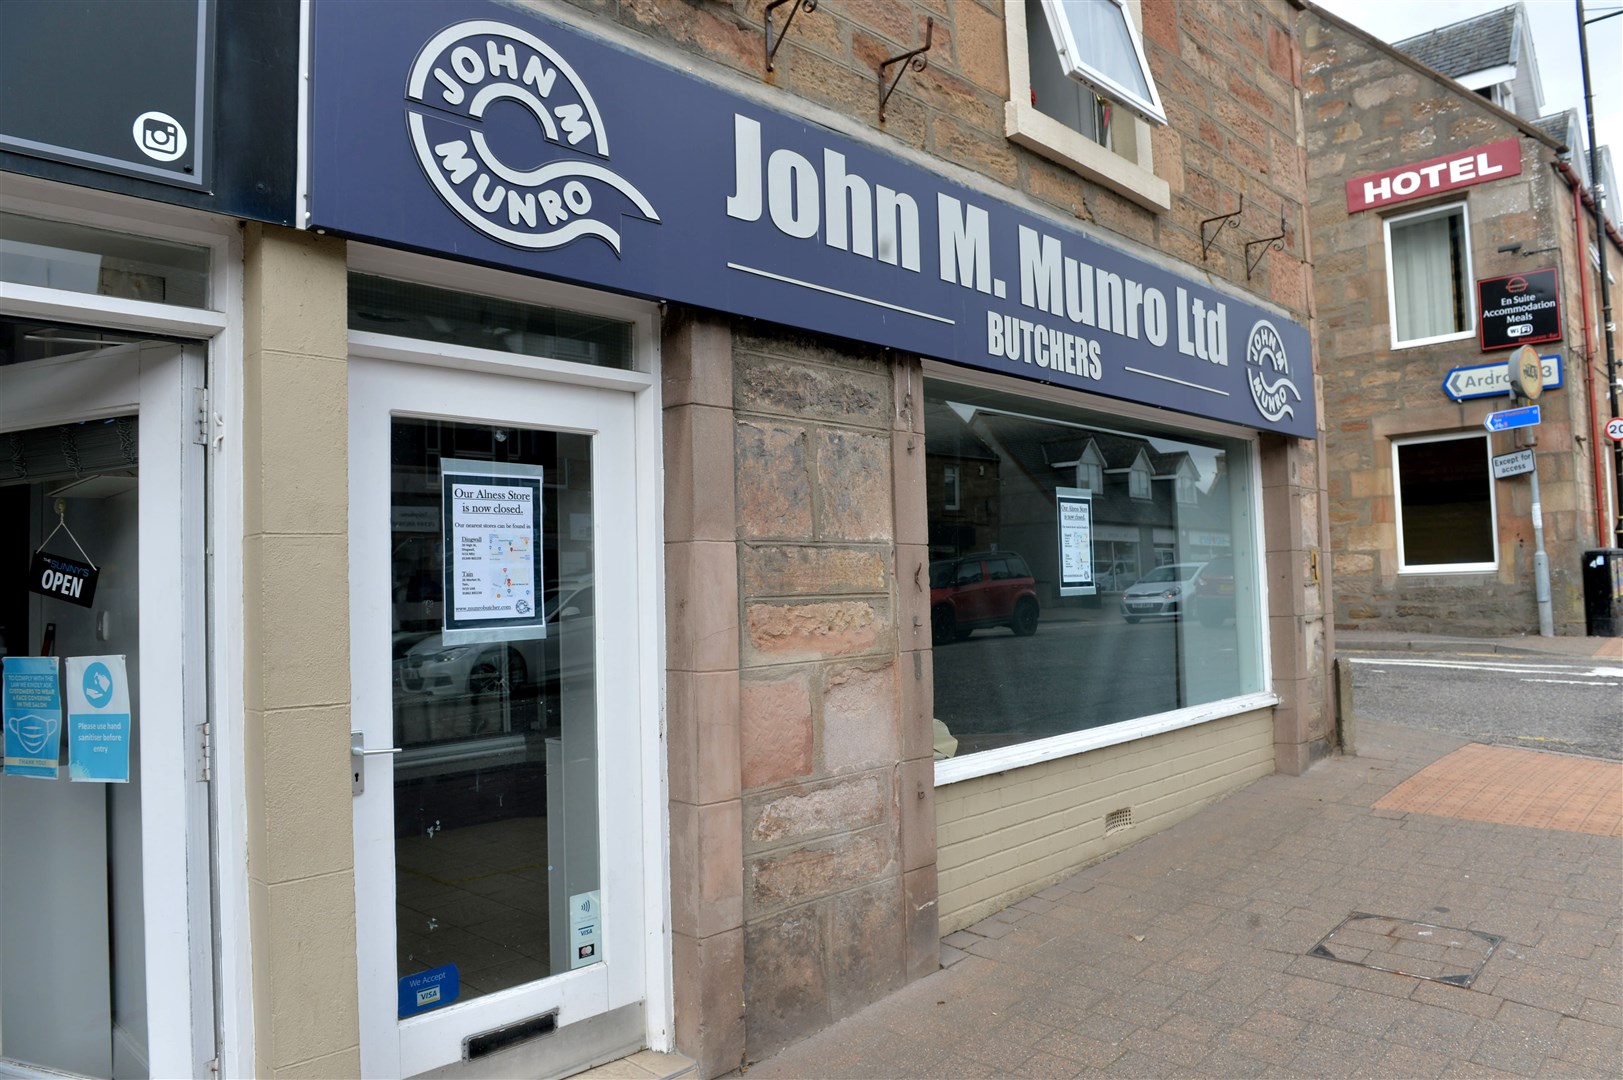 The John M. Munro butcher shop in Alness has closed after 48 years.